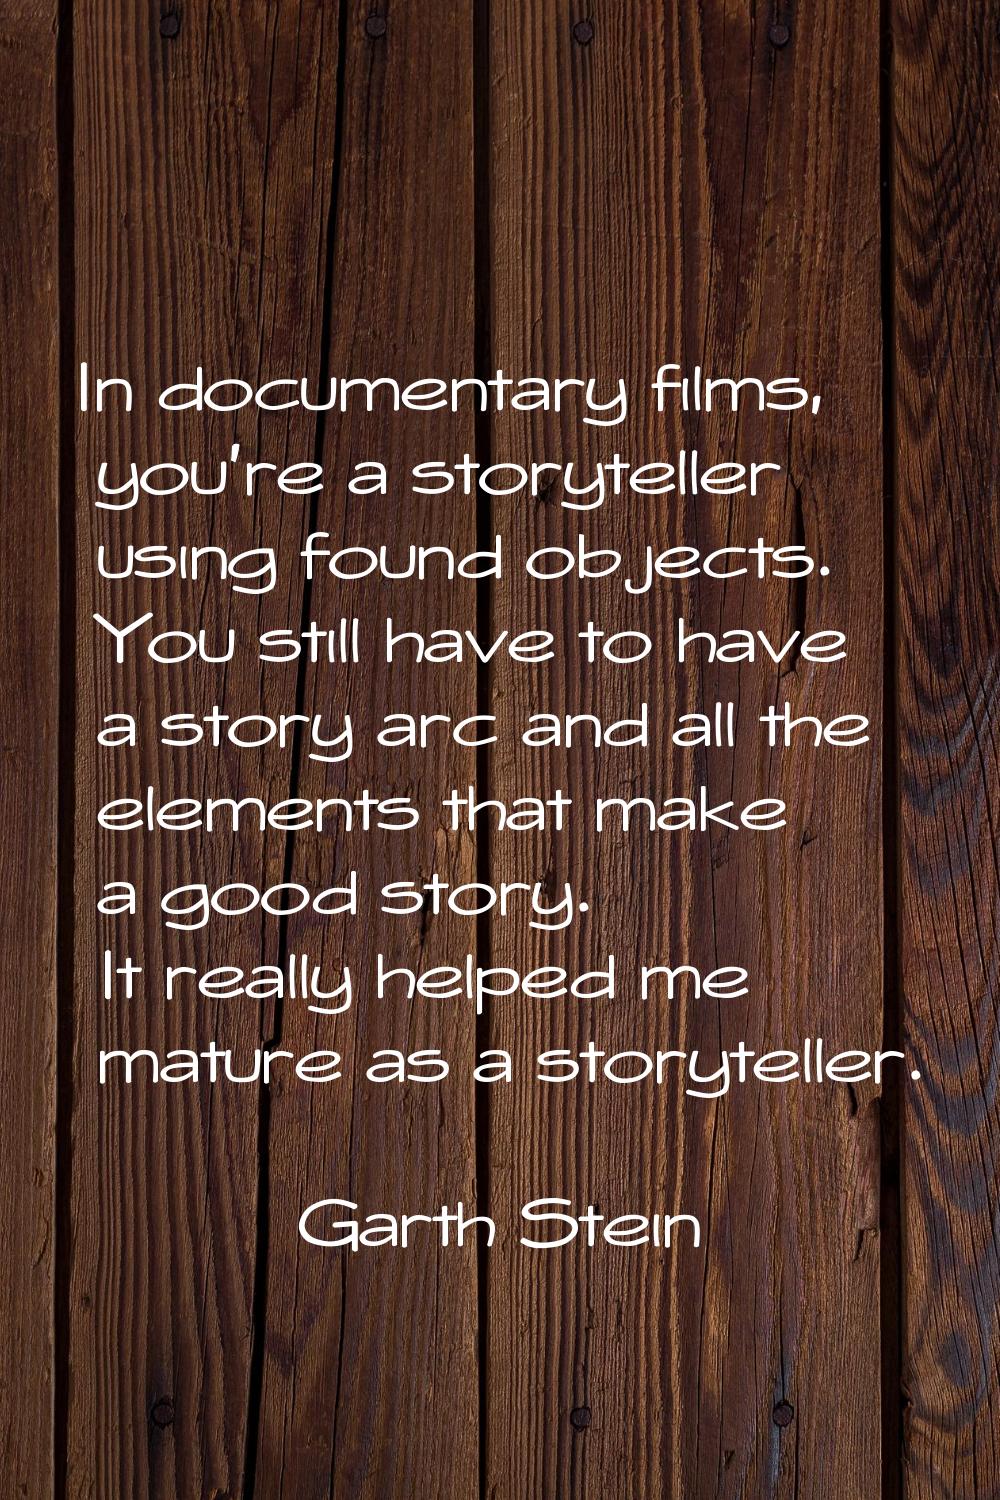 In documentary films, you're a storyteller using found objects. You still have to have a story arc 